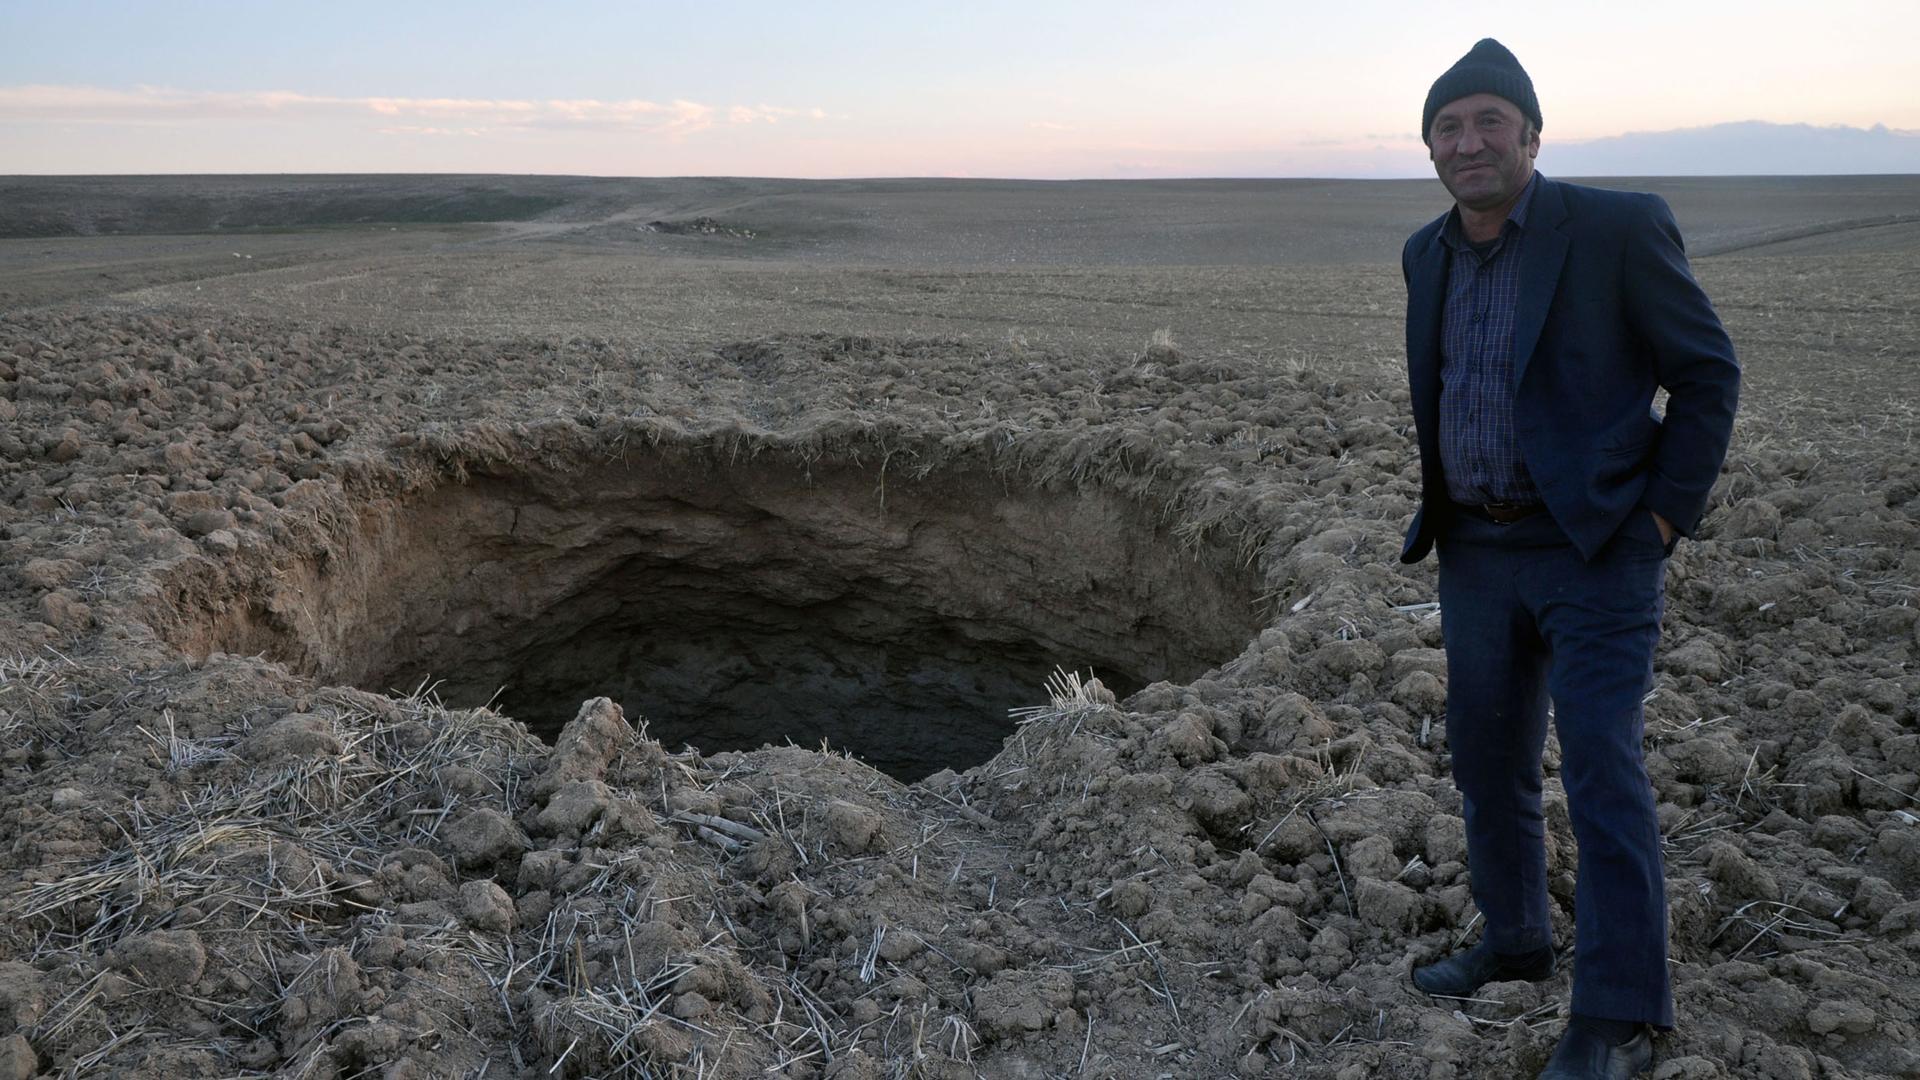 Cafer Ata stands beside a new sinkhole that opened up recently in a neighbor’s field.